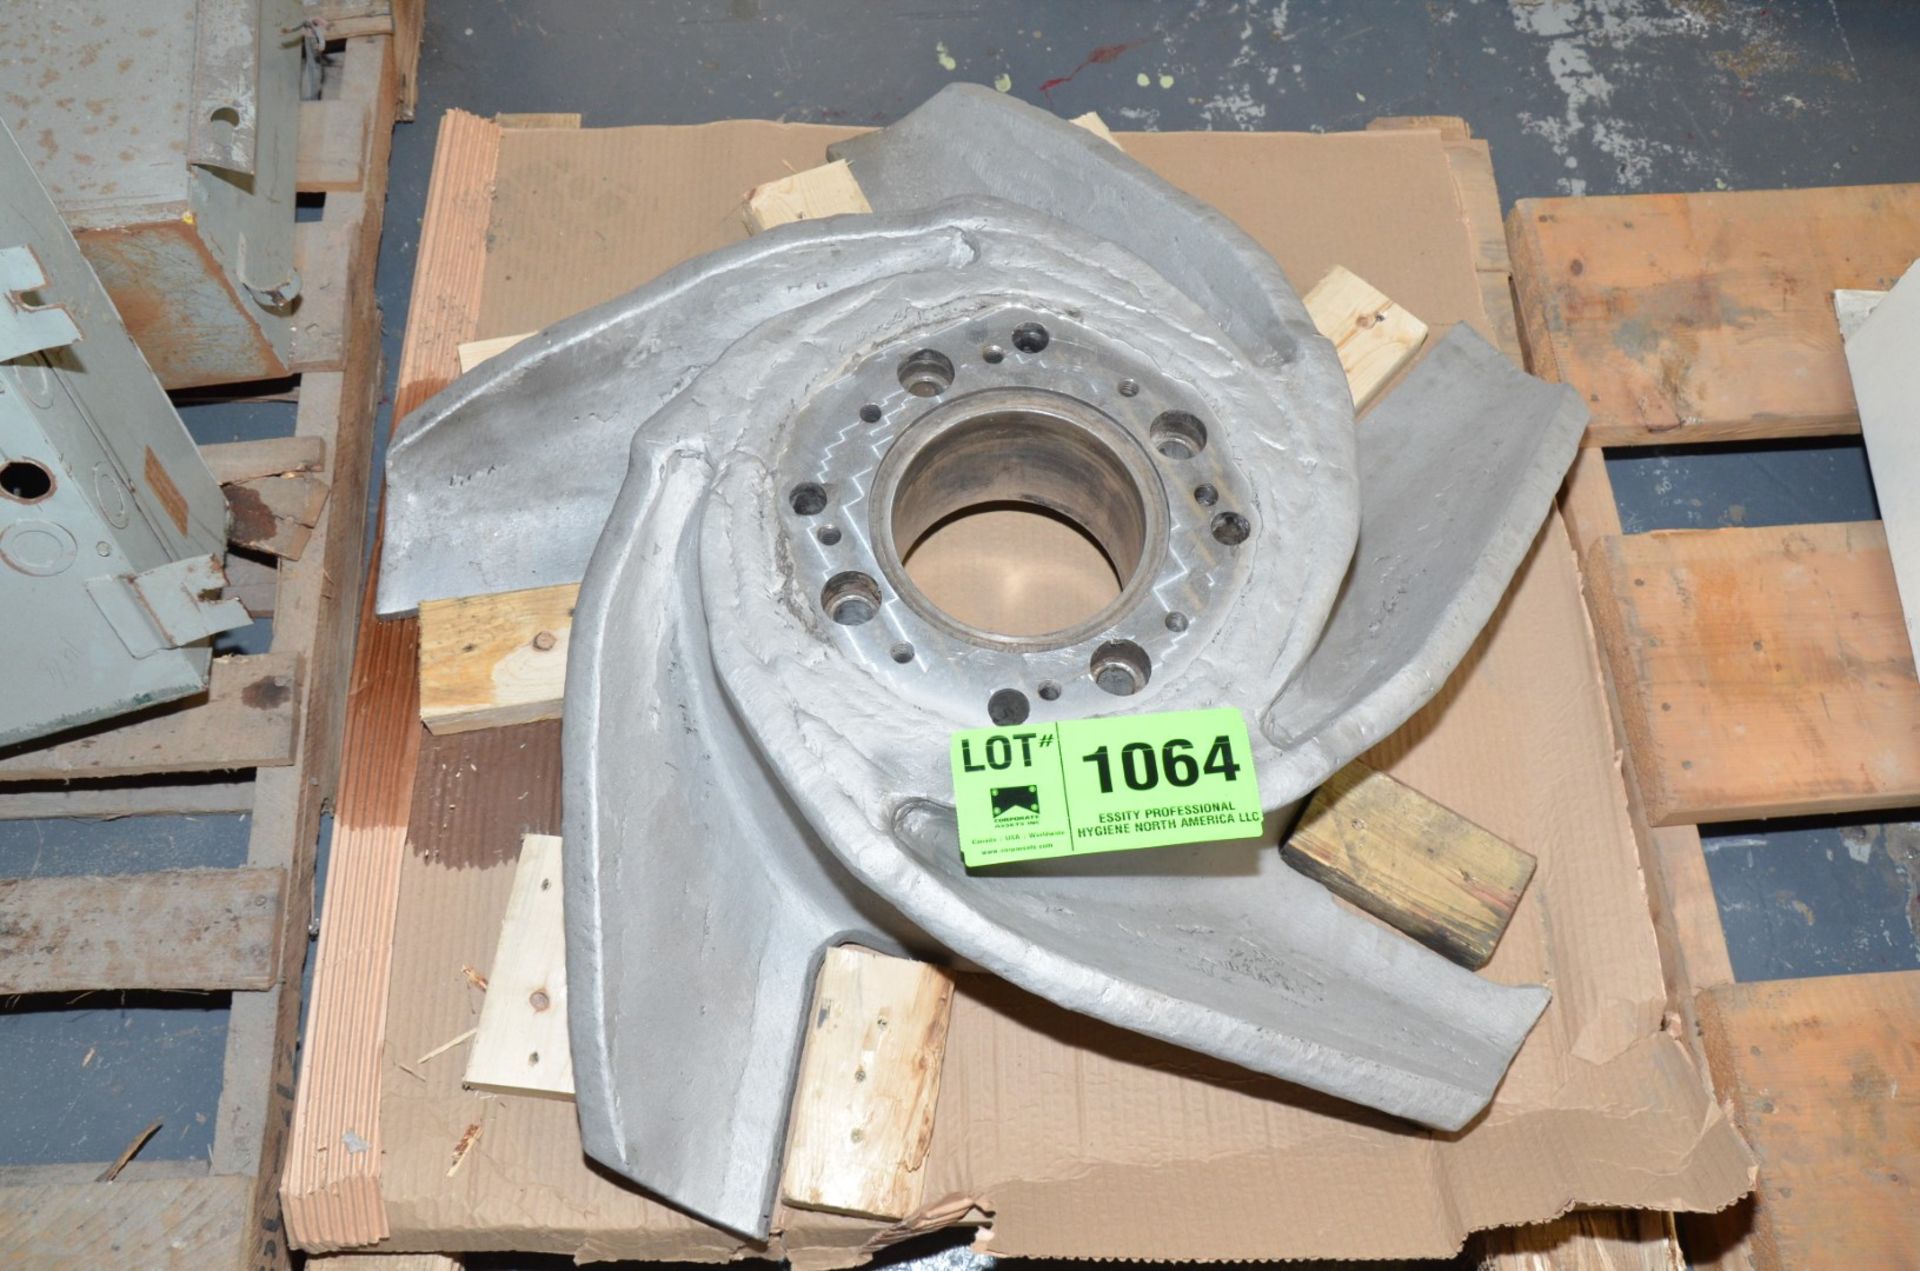 36" STAINLESS STEEL PULPER IMPELLER [RIGGING FEE FOR LOT #1064 - $25 USD PLUS APPLICABLE TAXES]